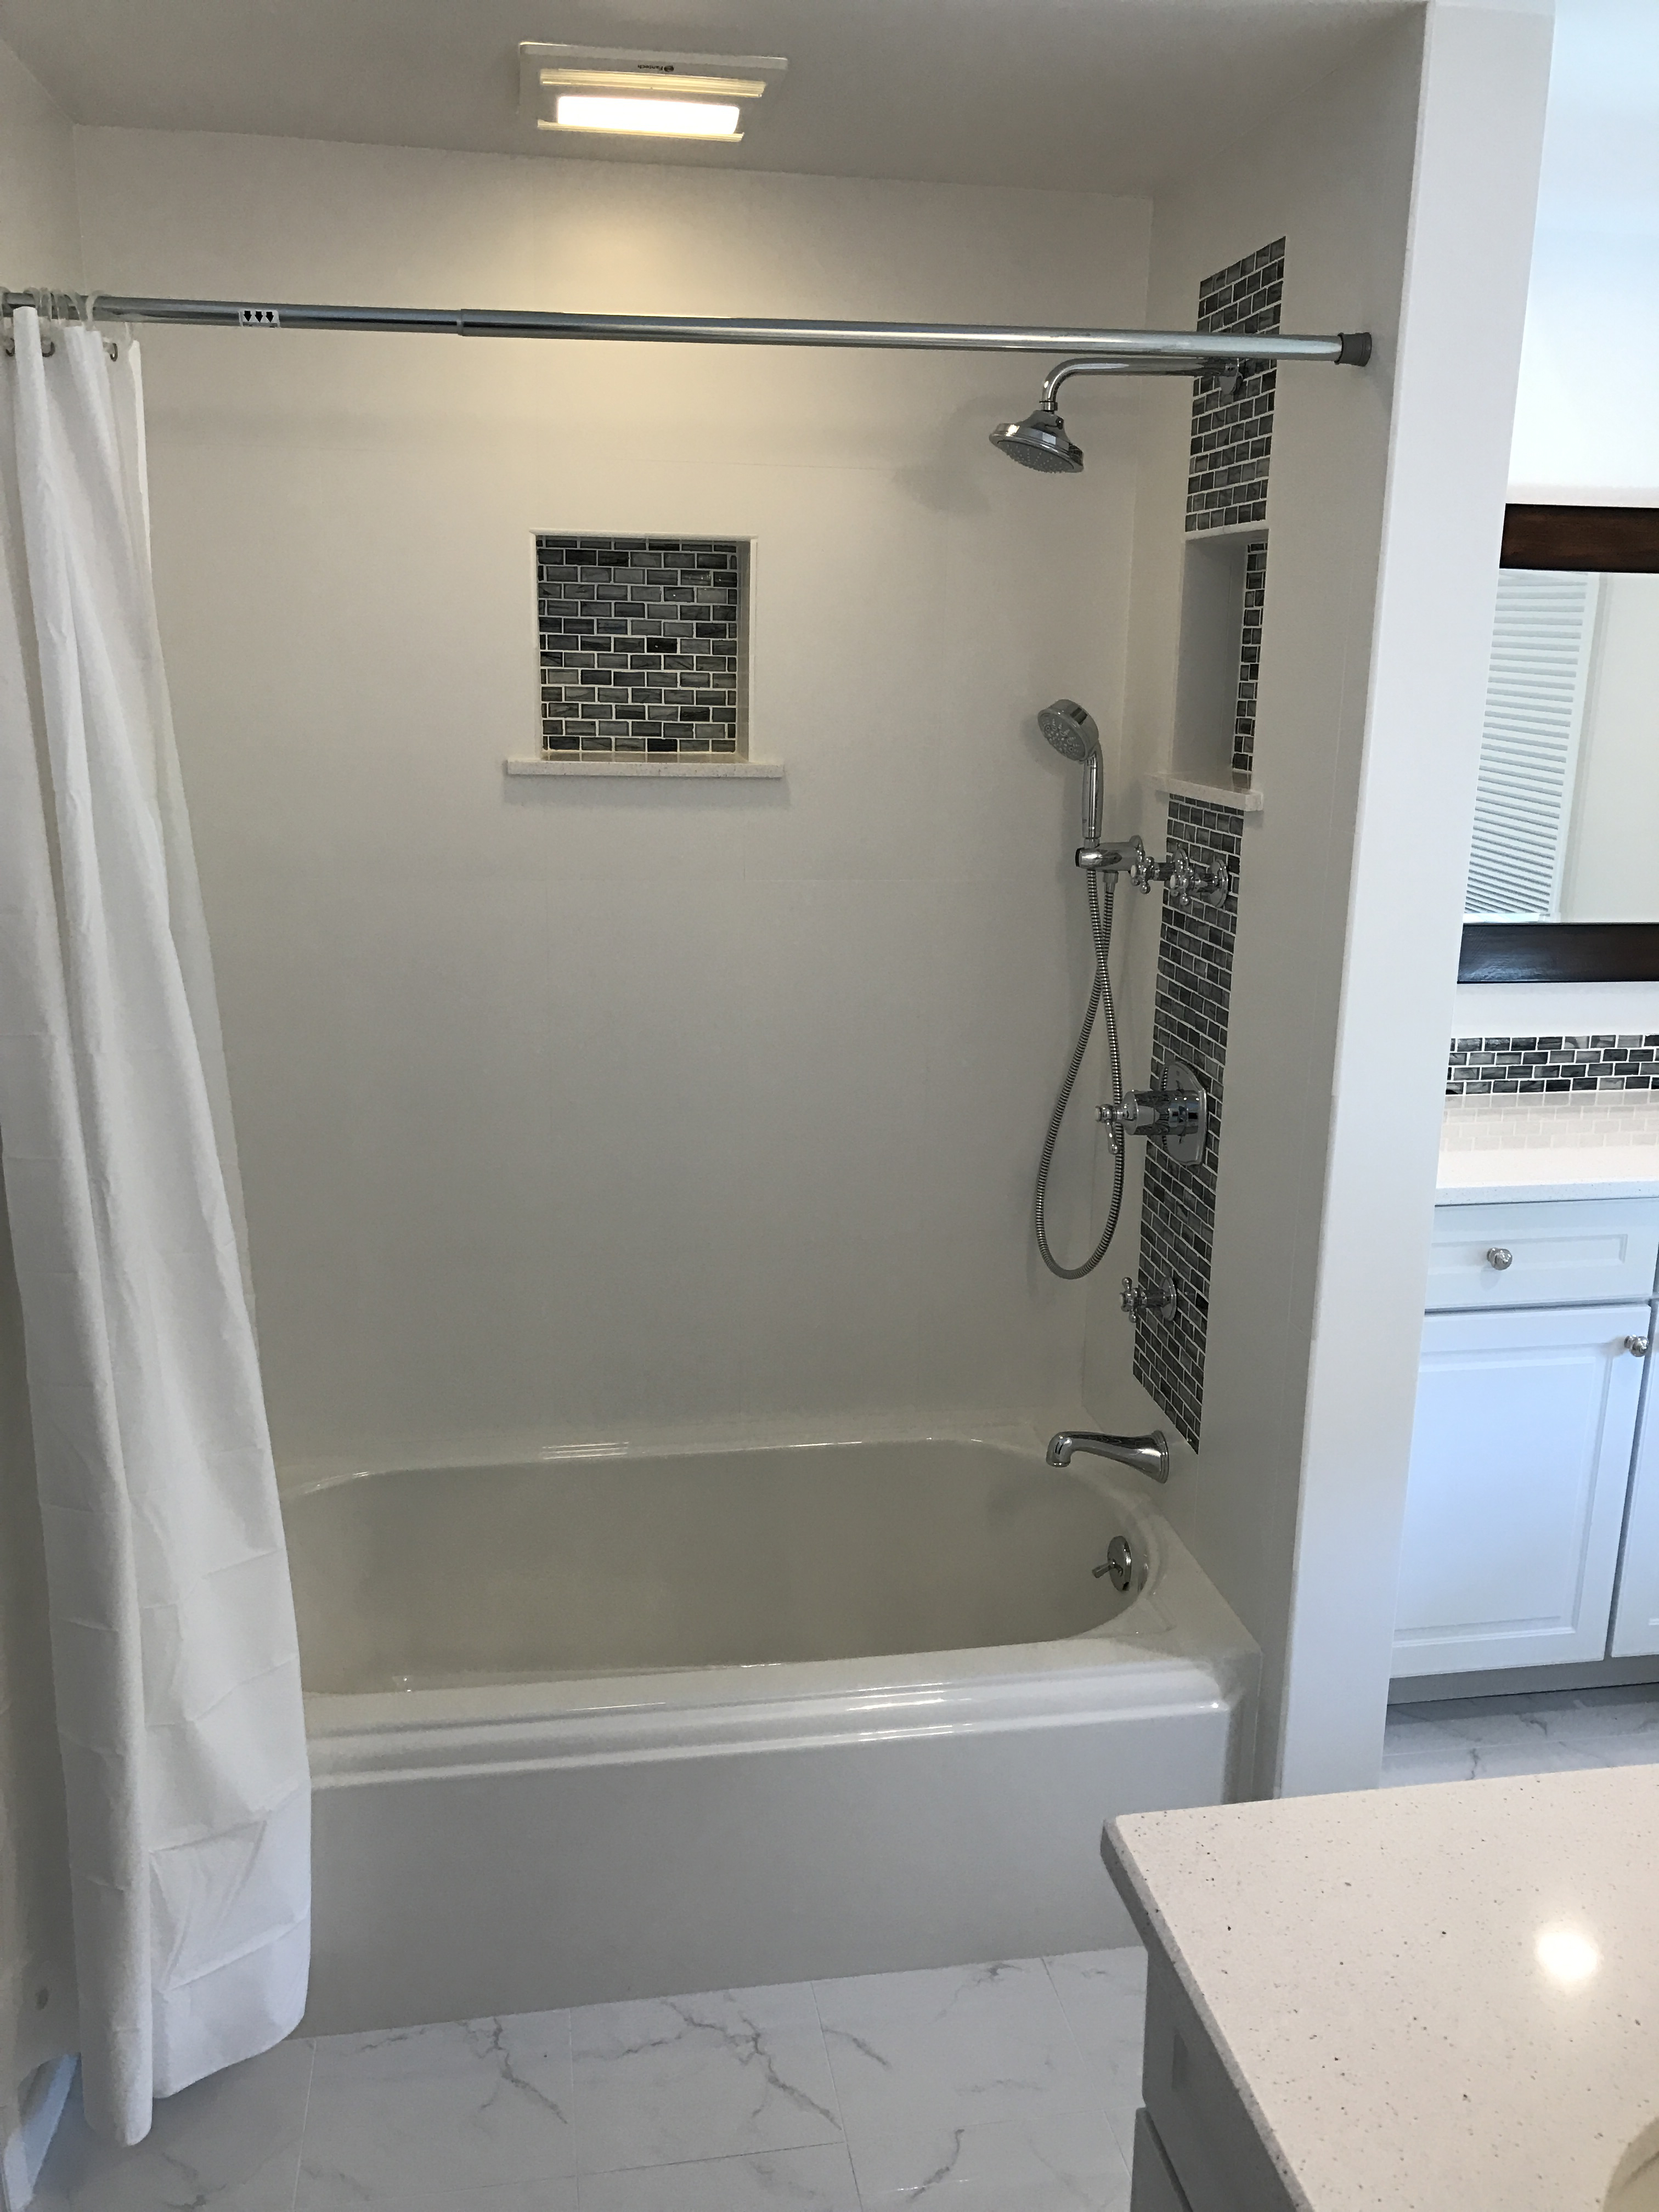 Shower/tub combo with mosaic tile